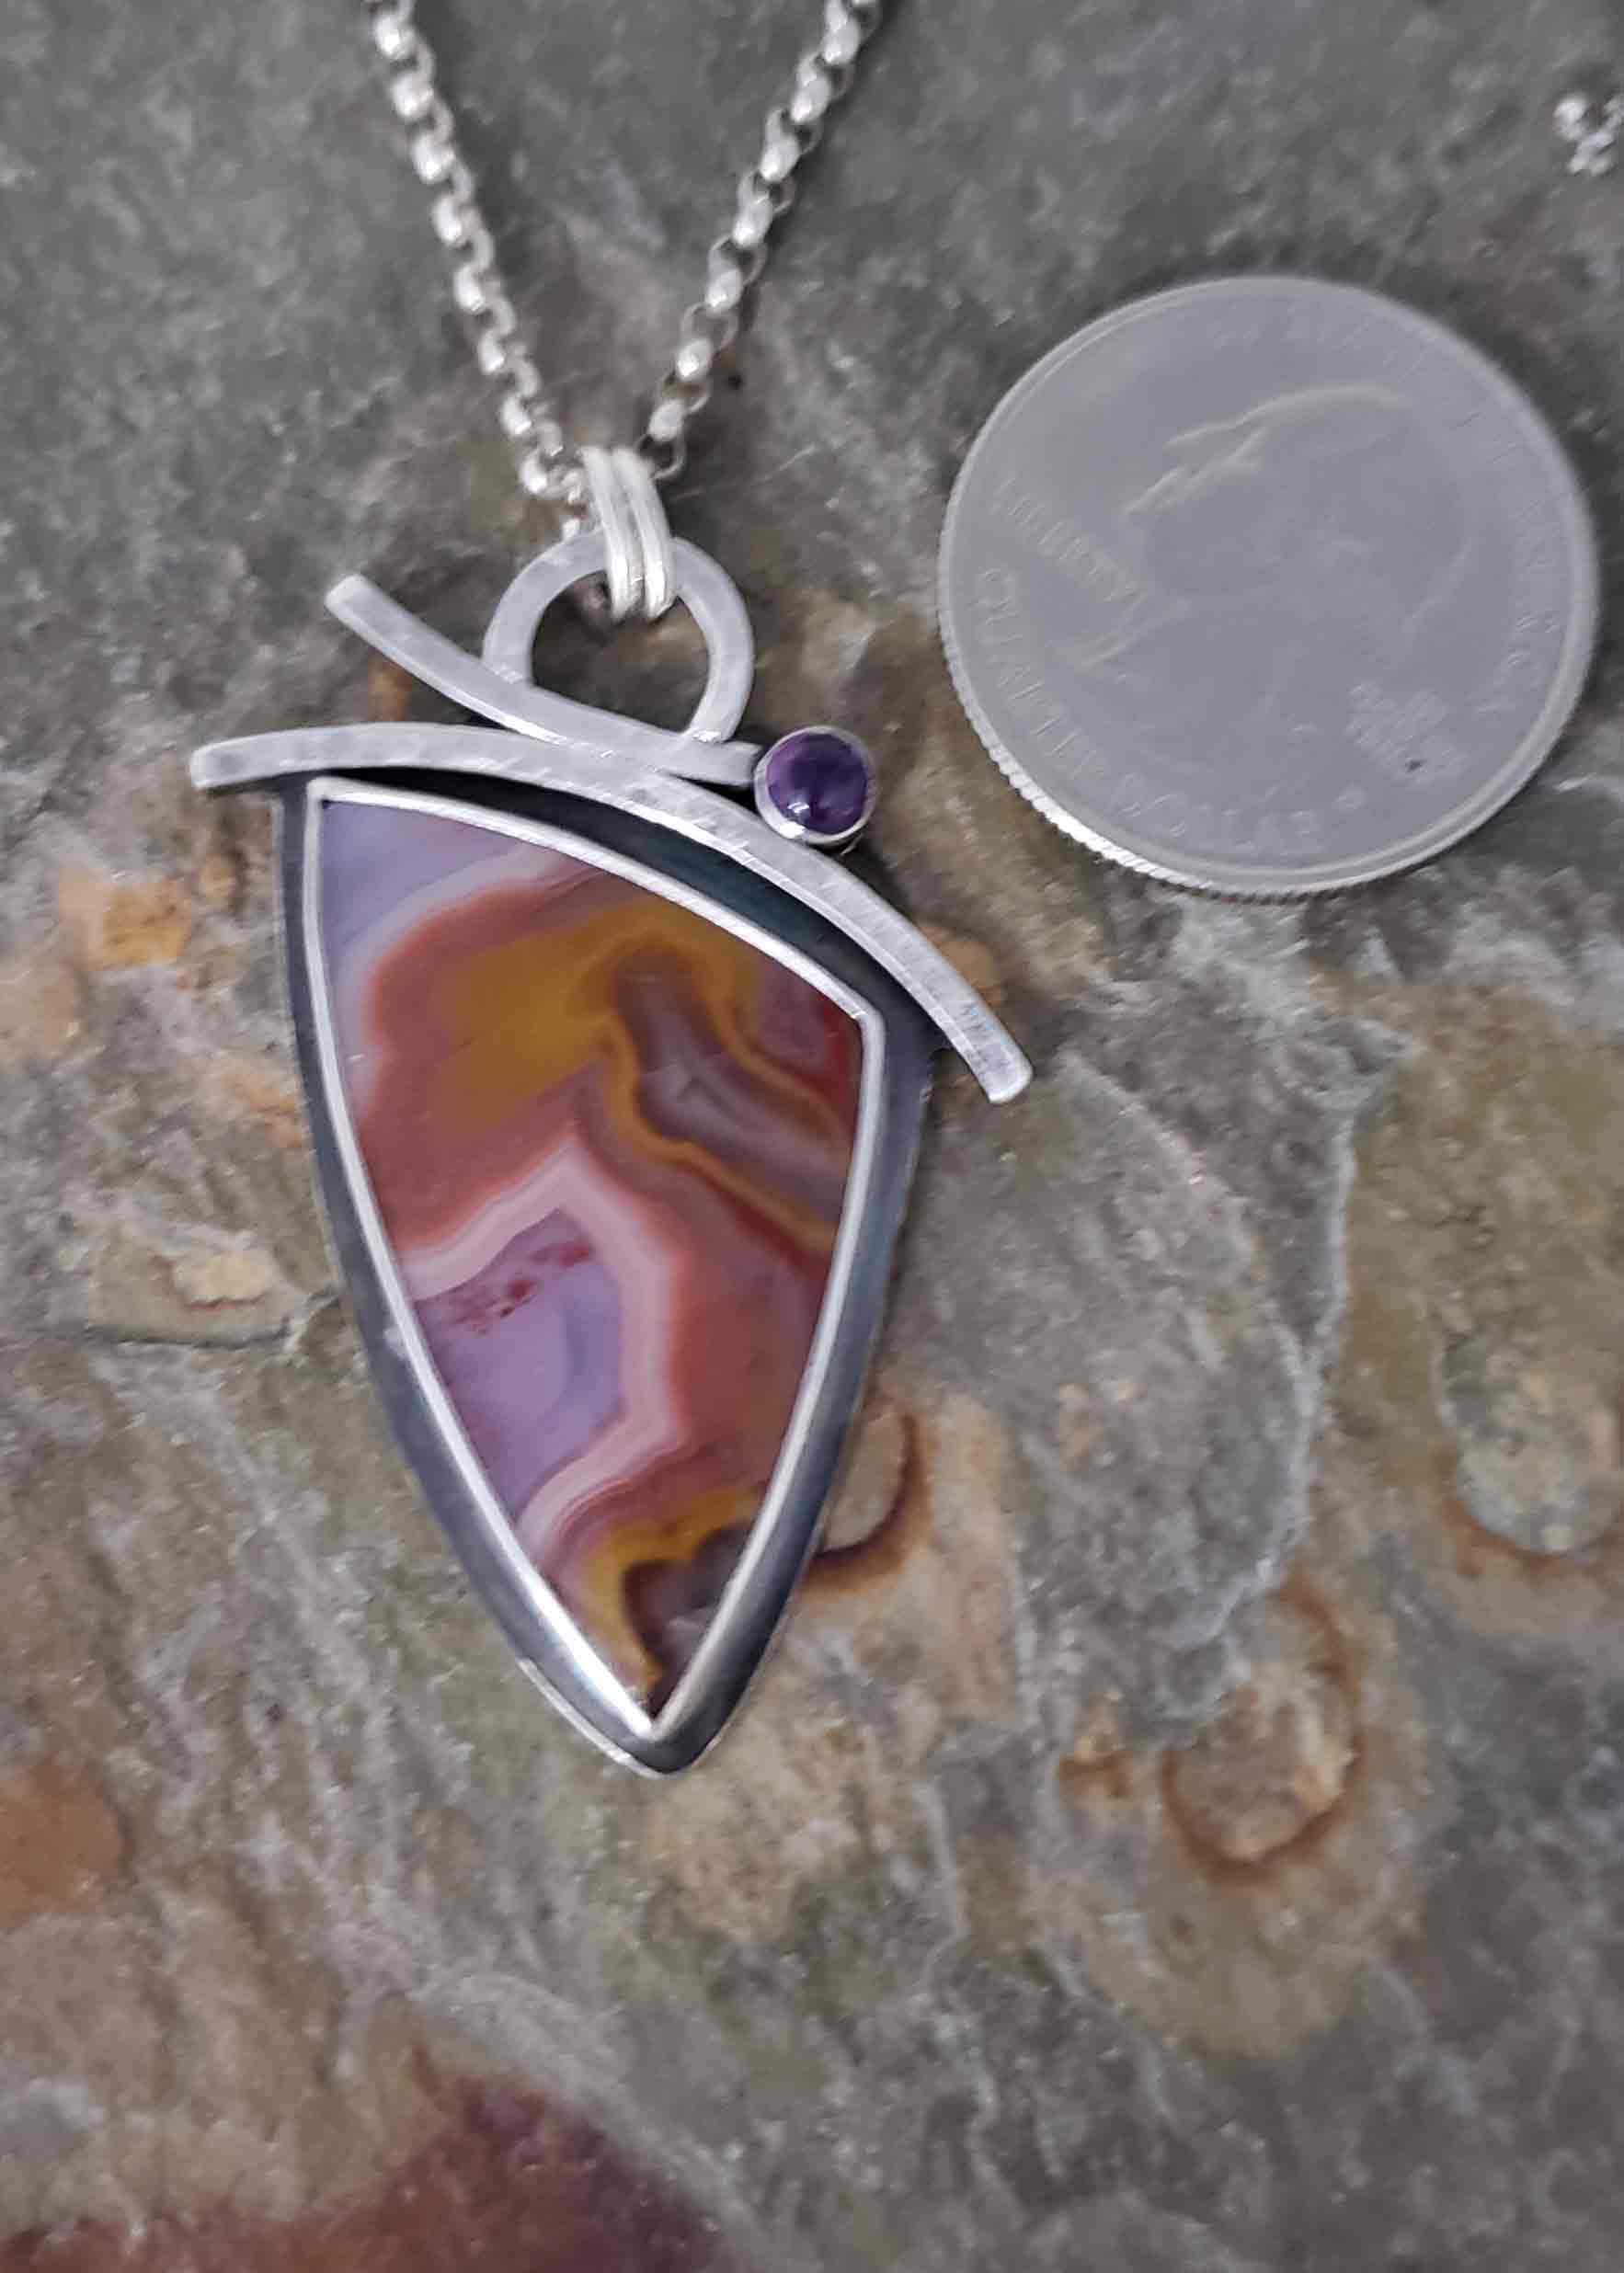 purples and rusts dominate this focal stone agua nueva, accented with amethyst.